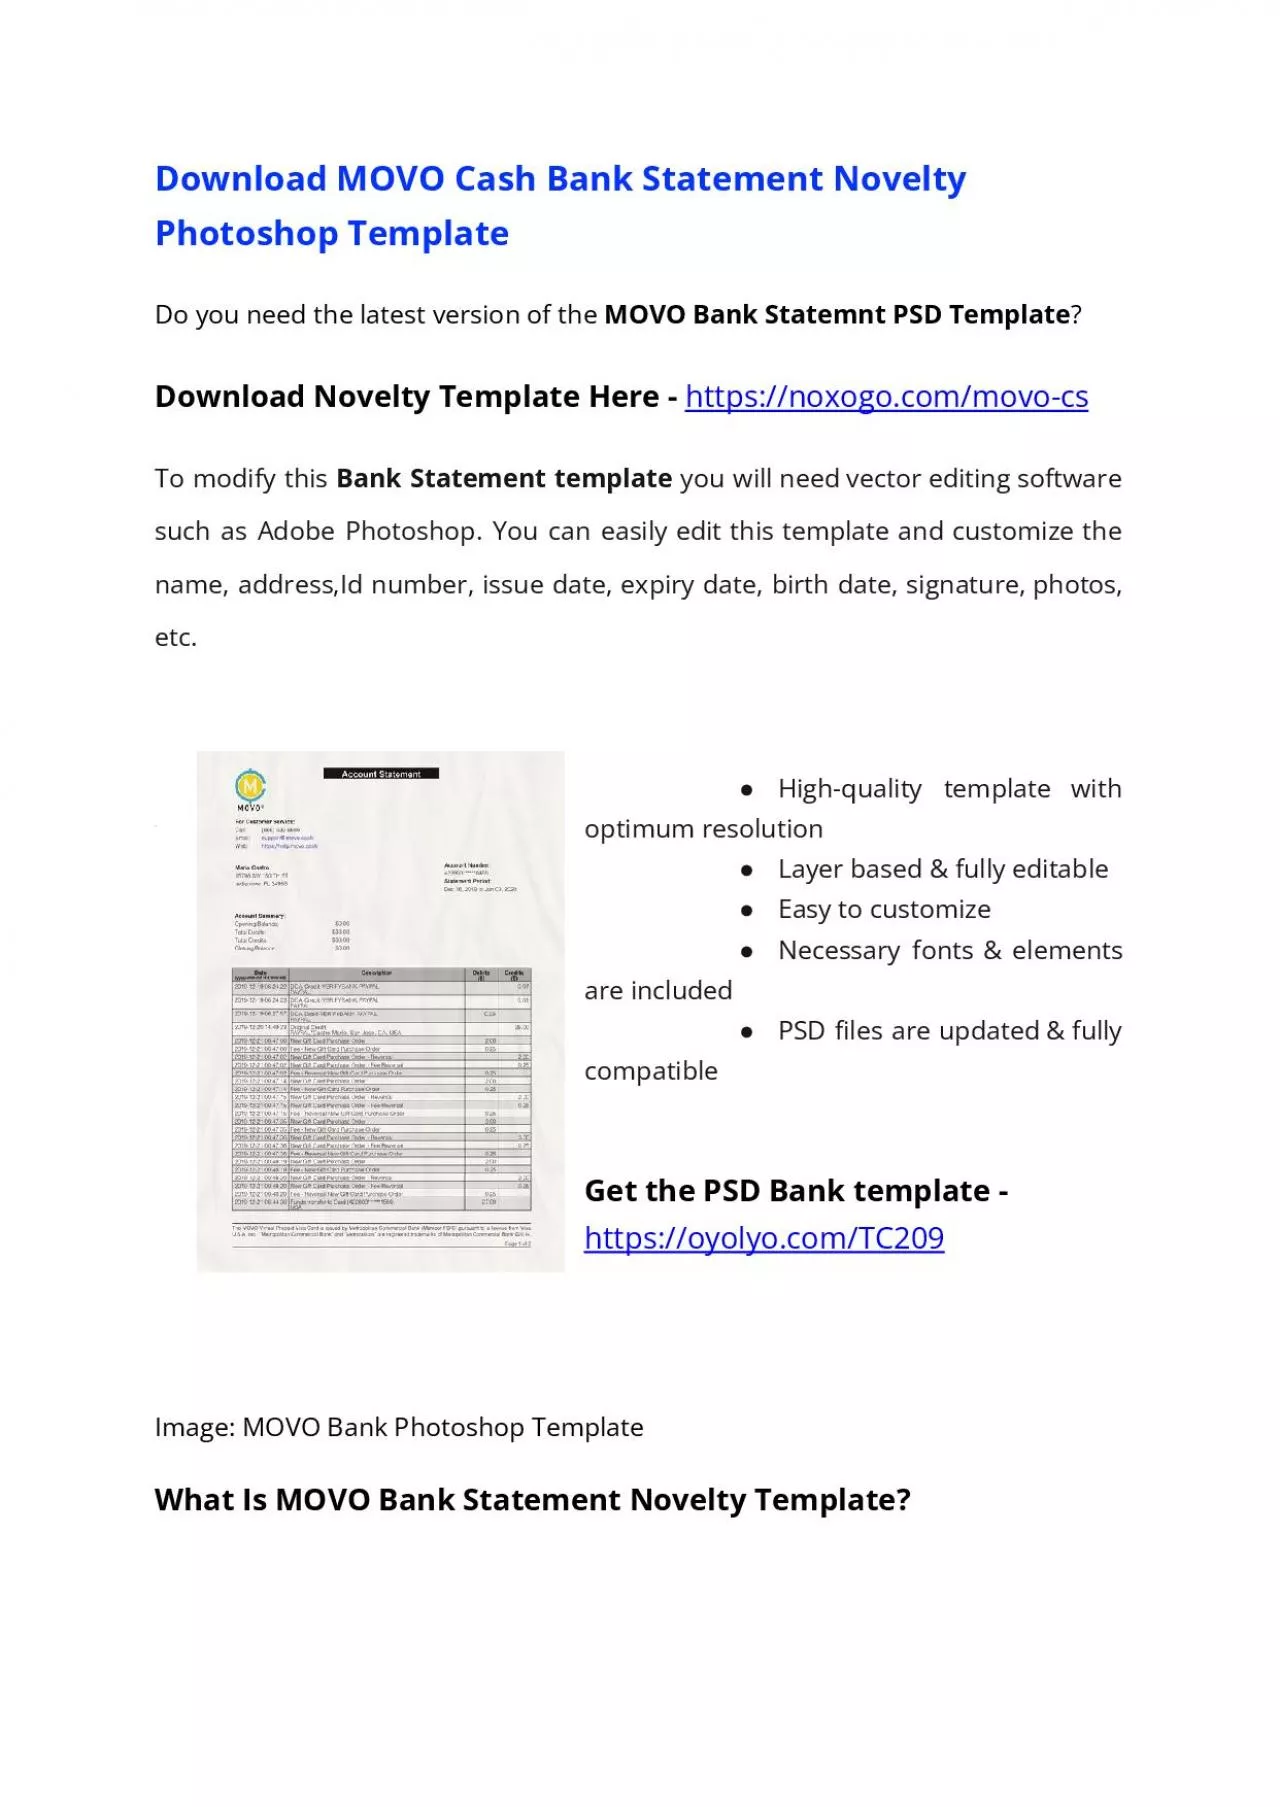 MOVO Cash Statement PSD Template – Download Photoshop File